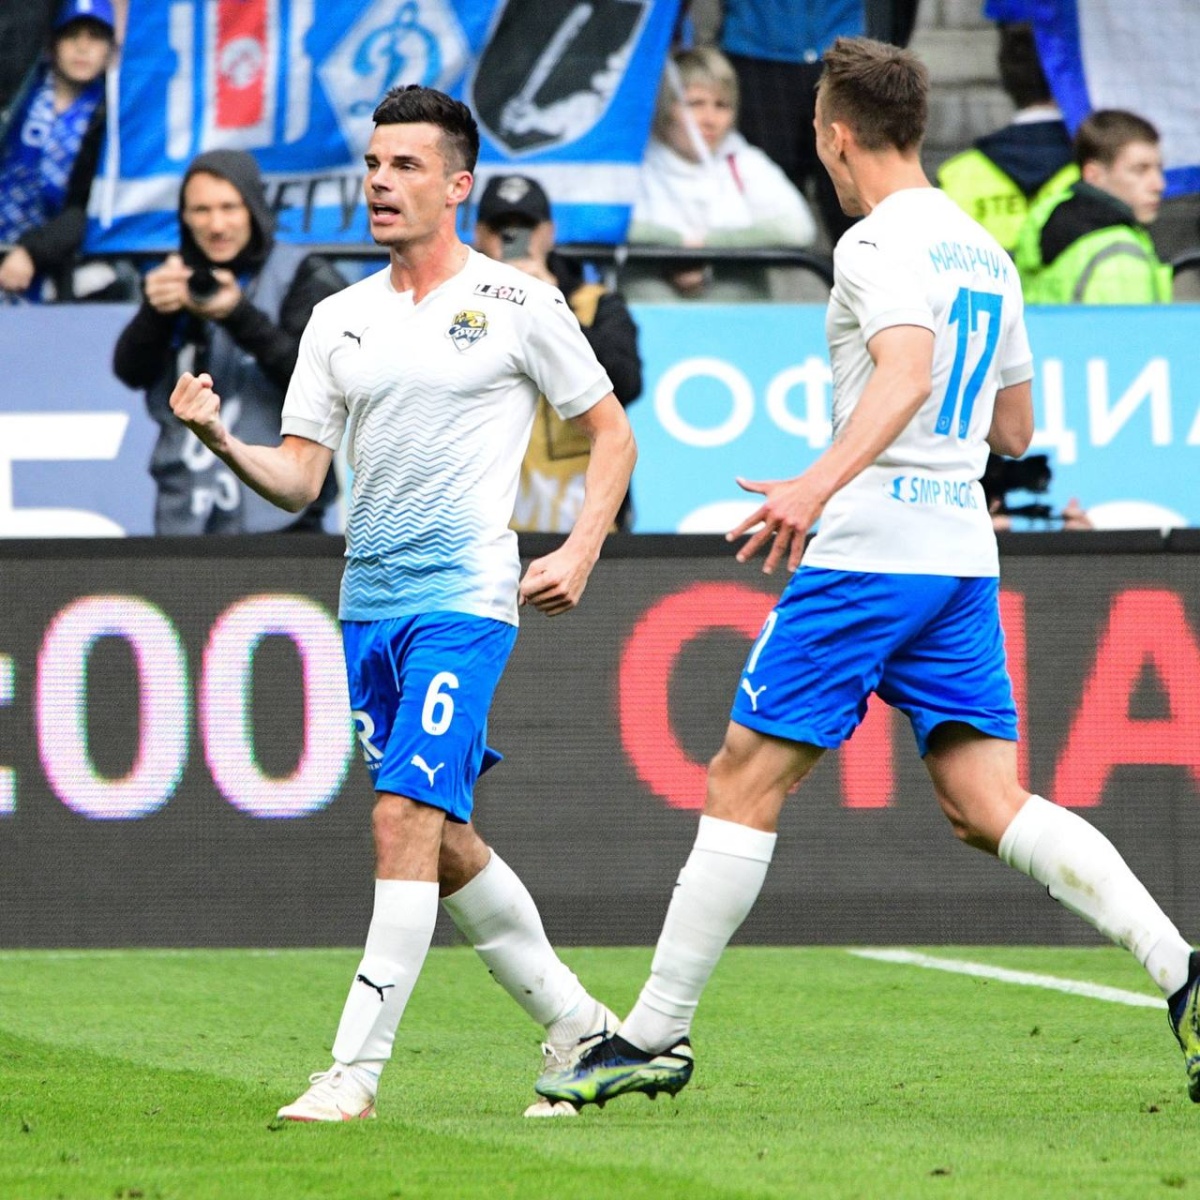 Artur Yusupov is the author of Sochi's best goal for May!